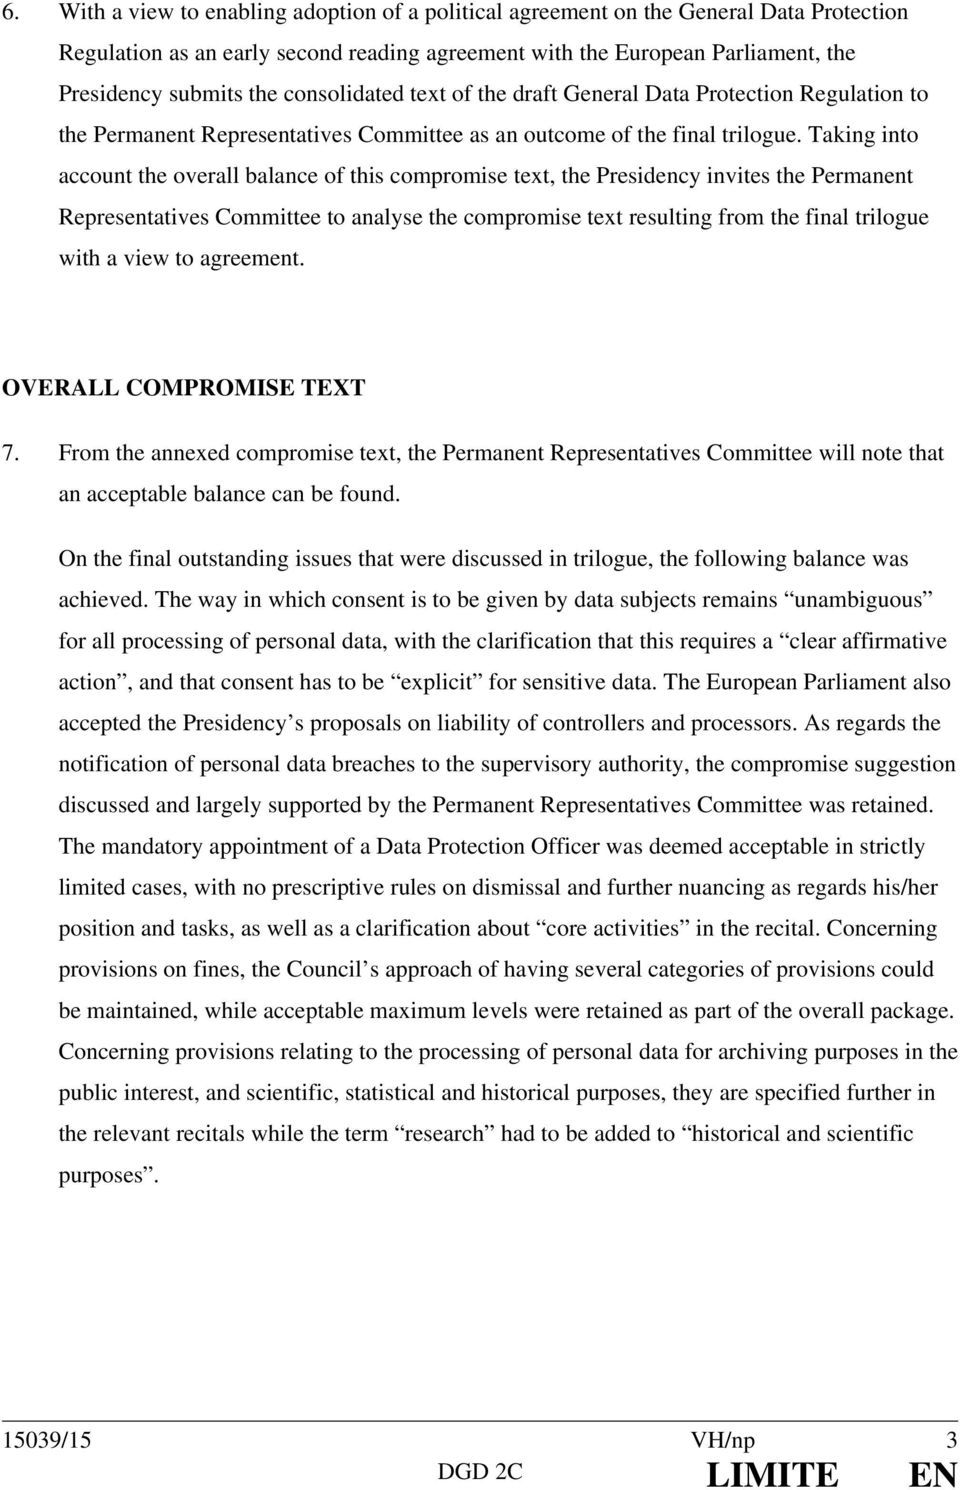 Taking into account the overall balance of this compromise text, the Presidency invites the Permanent Representatives Committee to analyse the compromise text resulting from the final trilogue with a